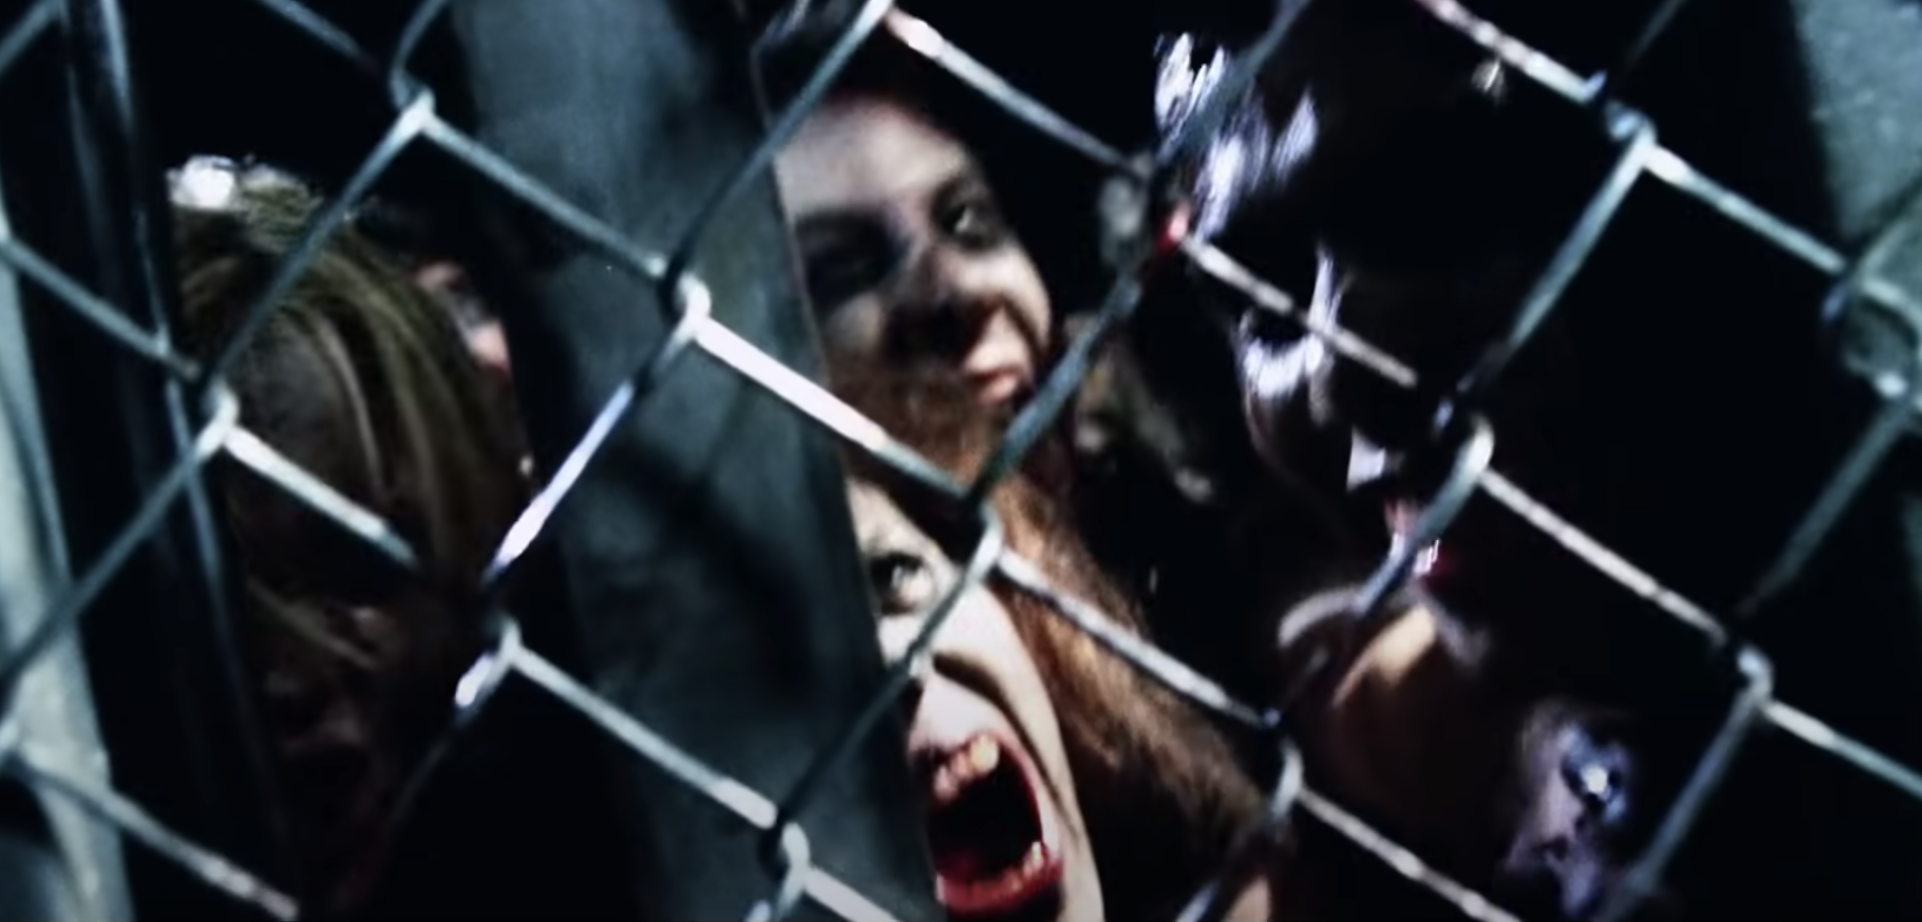 A bunch of blood-thirsty zombies snarl from behind a chain link fence